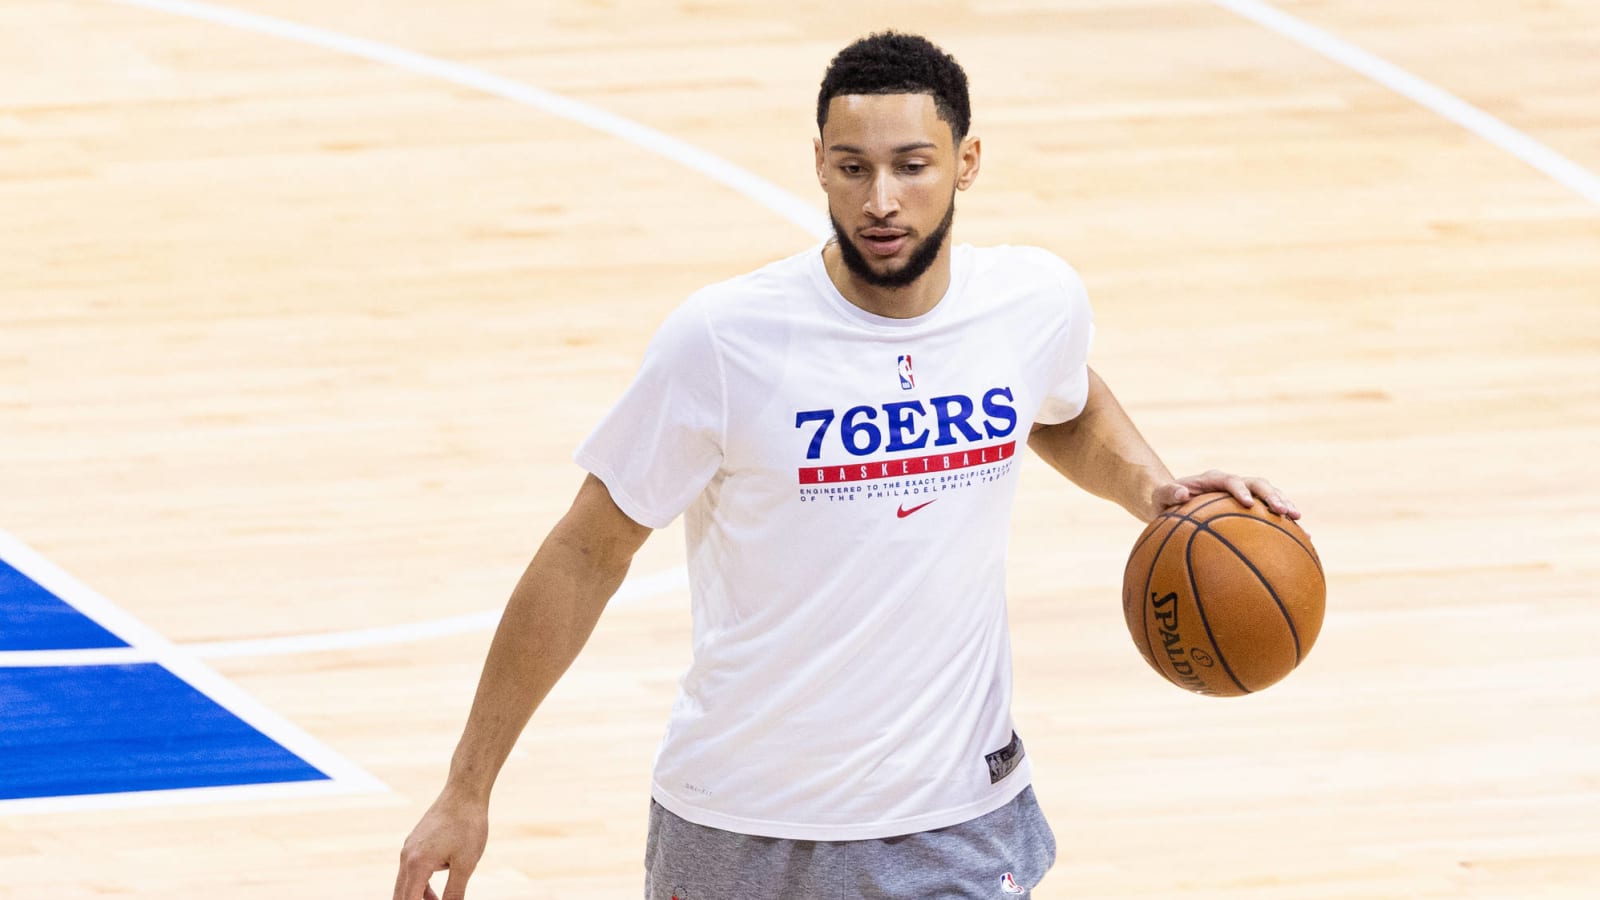 Ben Simmons withdraws from Olympics to focus on ‘development’